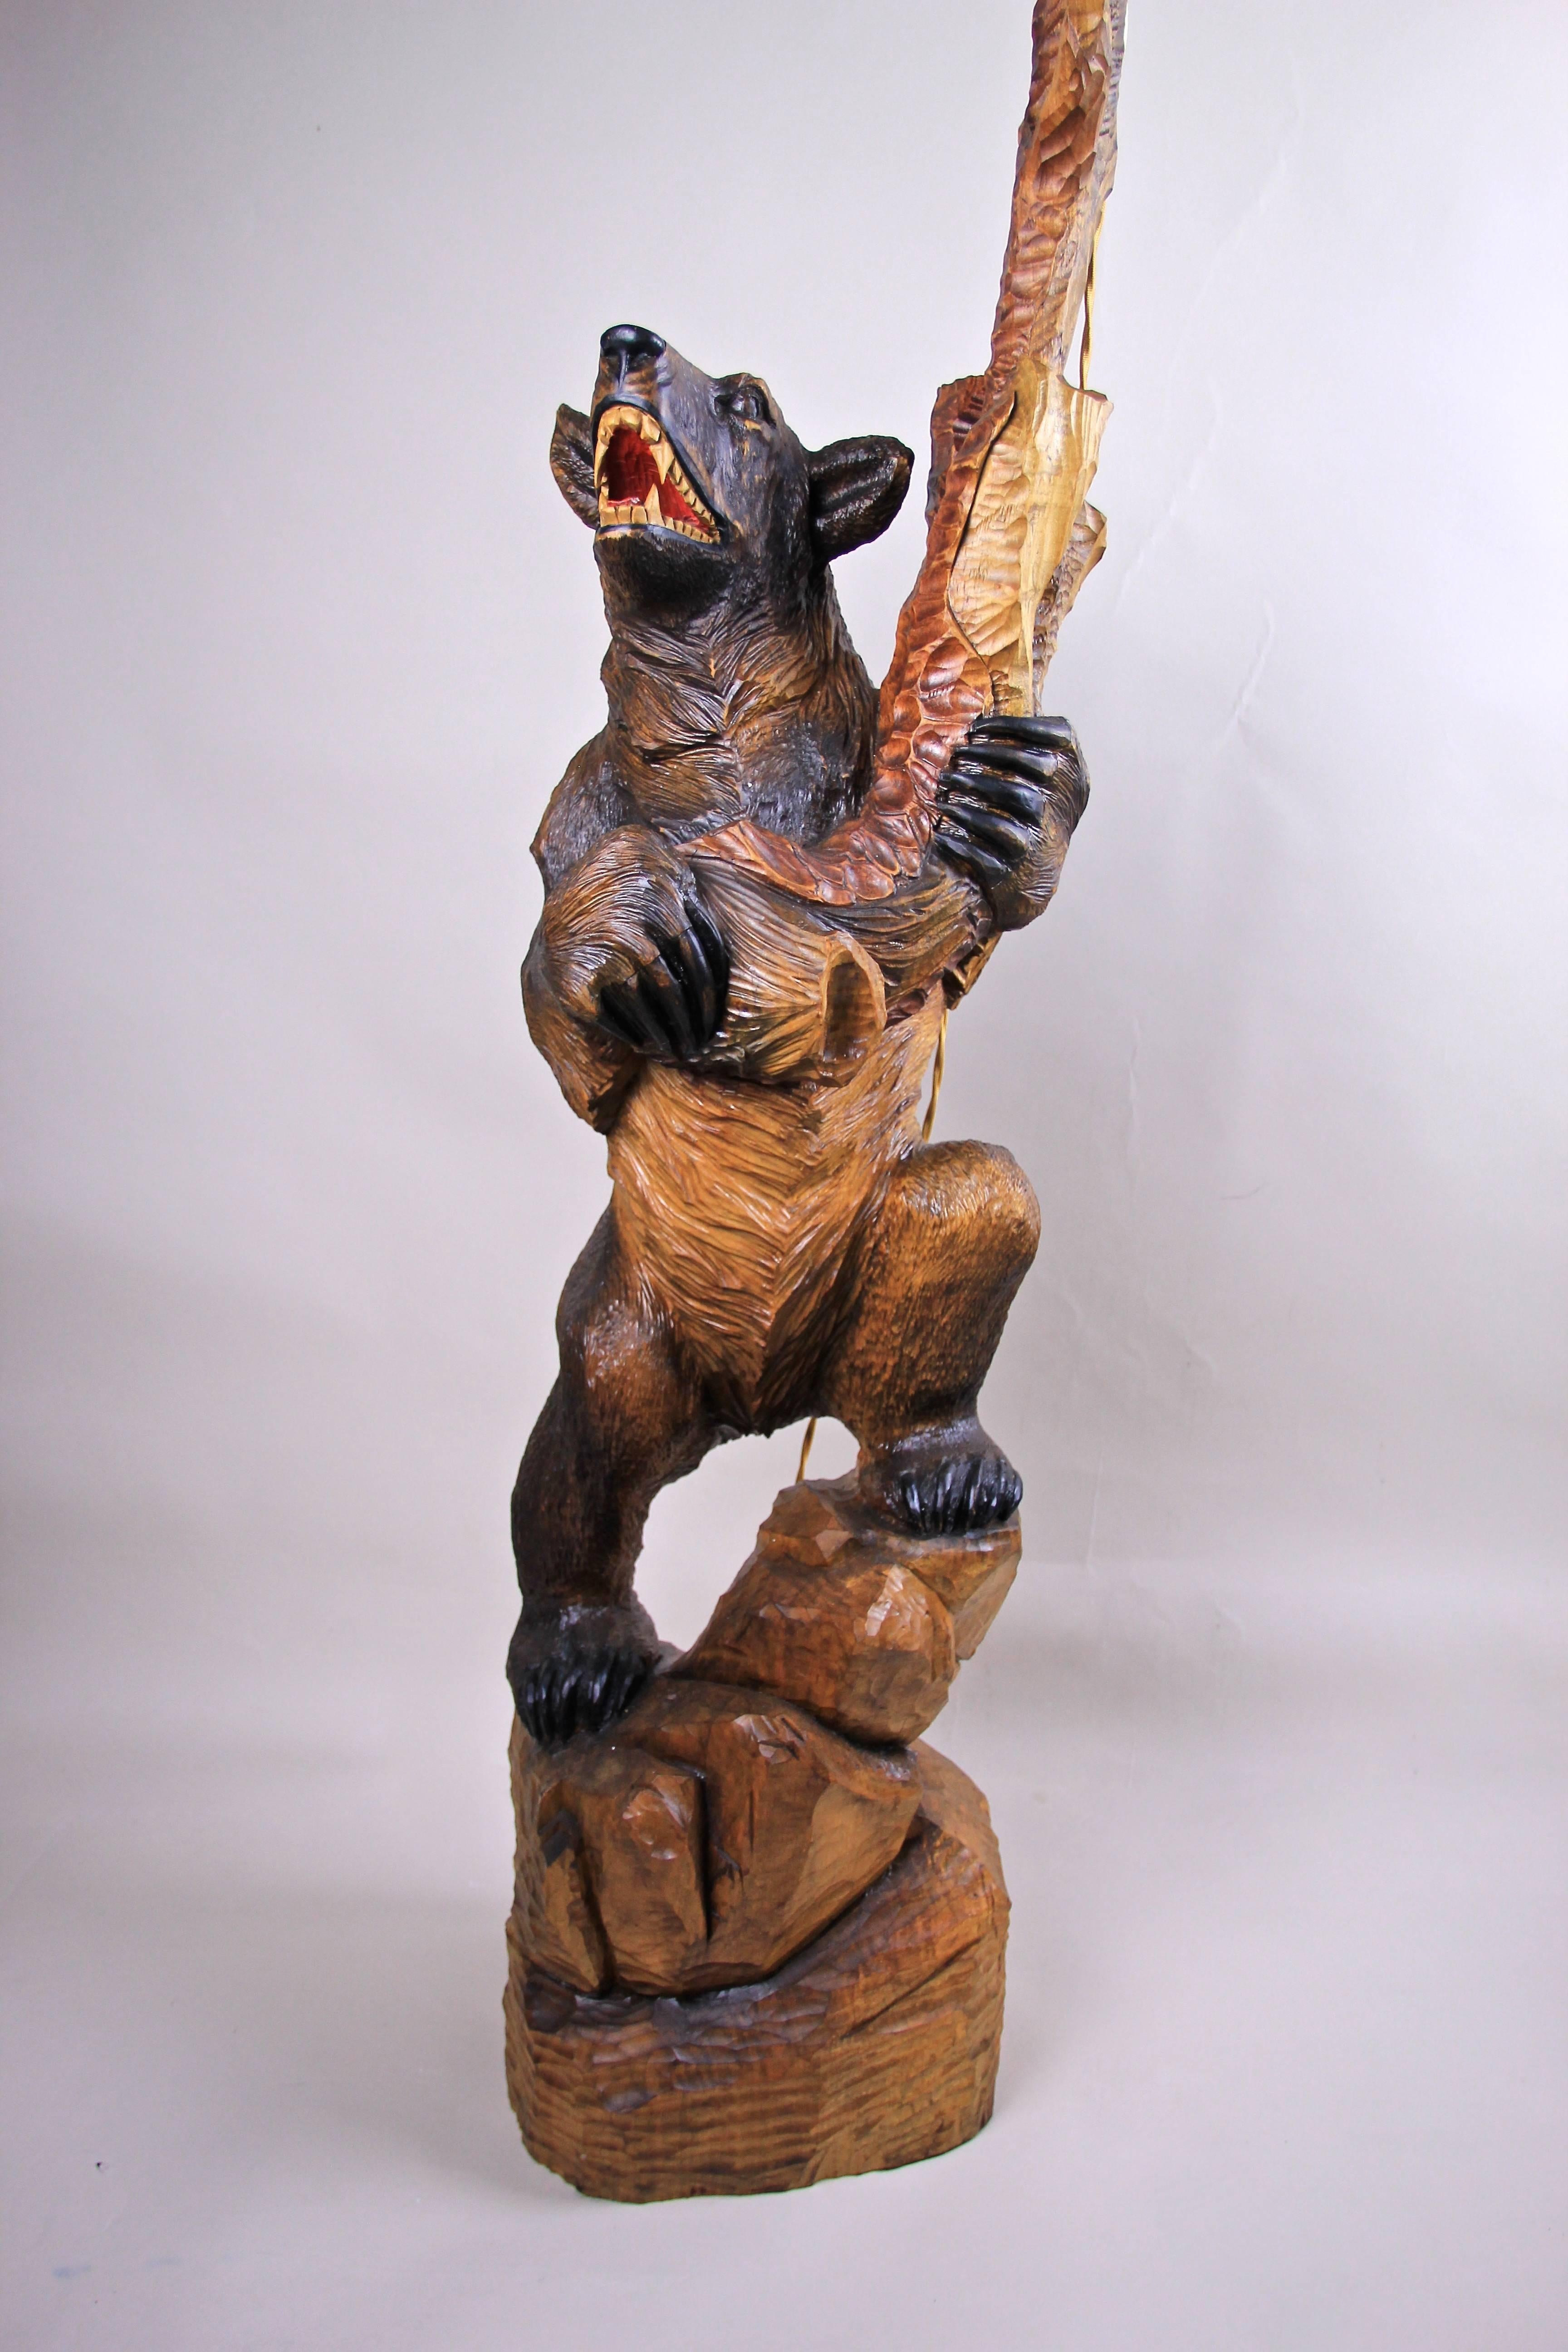 Exceptional Black Forest floor lamp from Bavaria/ Germany, circa 1940. This large hand-carved lamp is definitely an unusual piece shaped out of one big piece of wood. A bear stands on a stump holding a big tree limb which holds the renewed